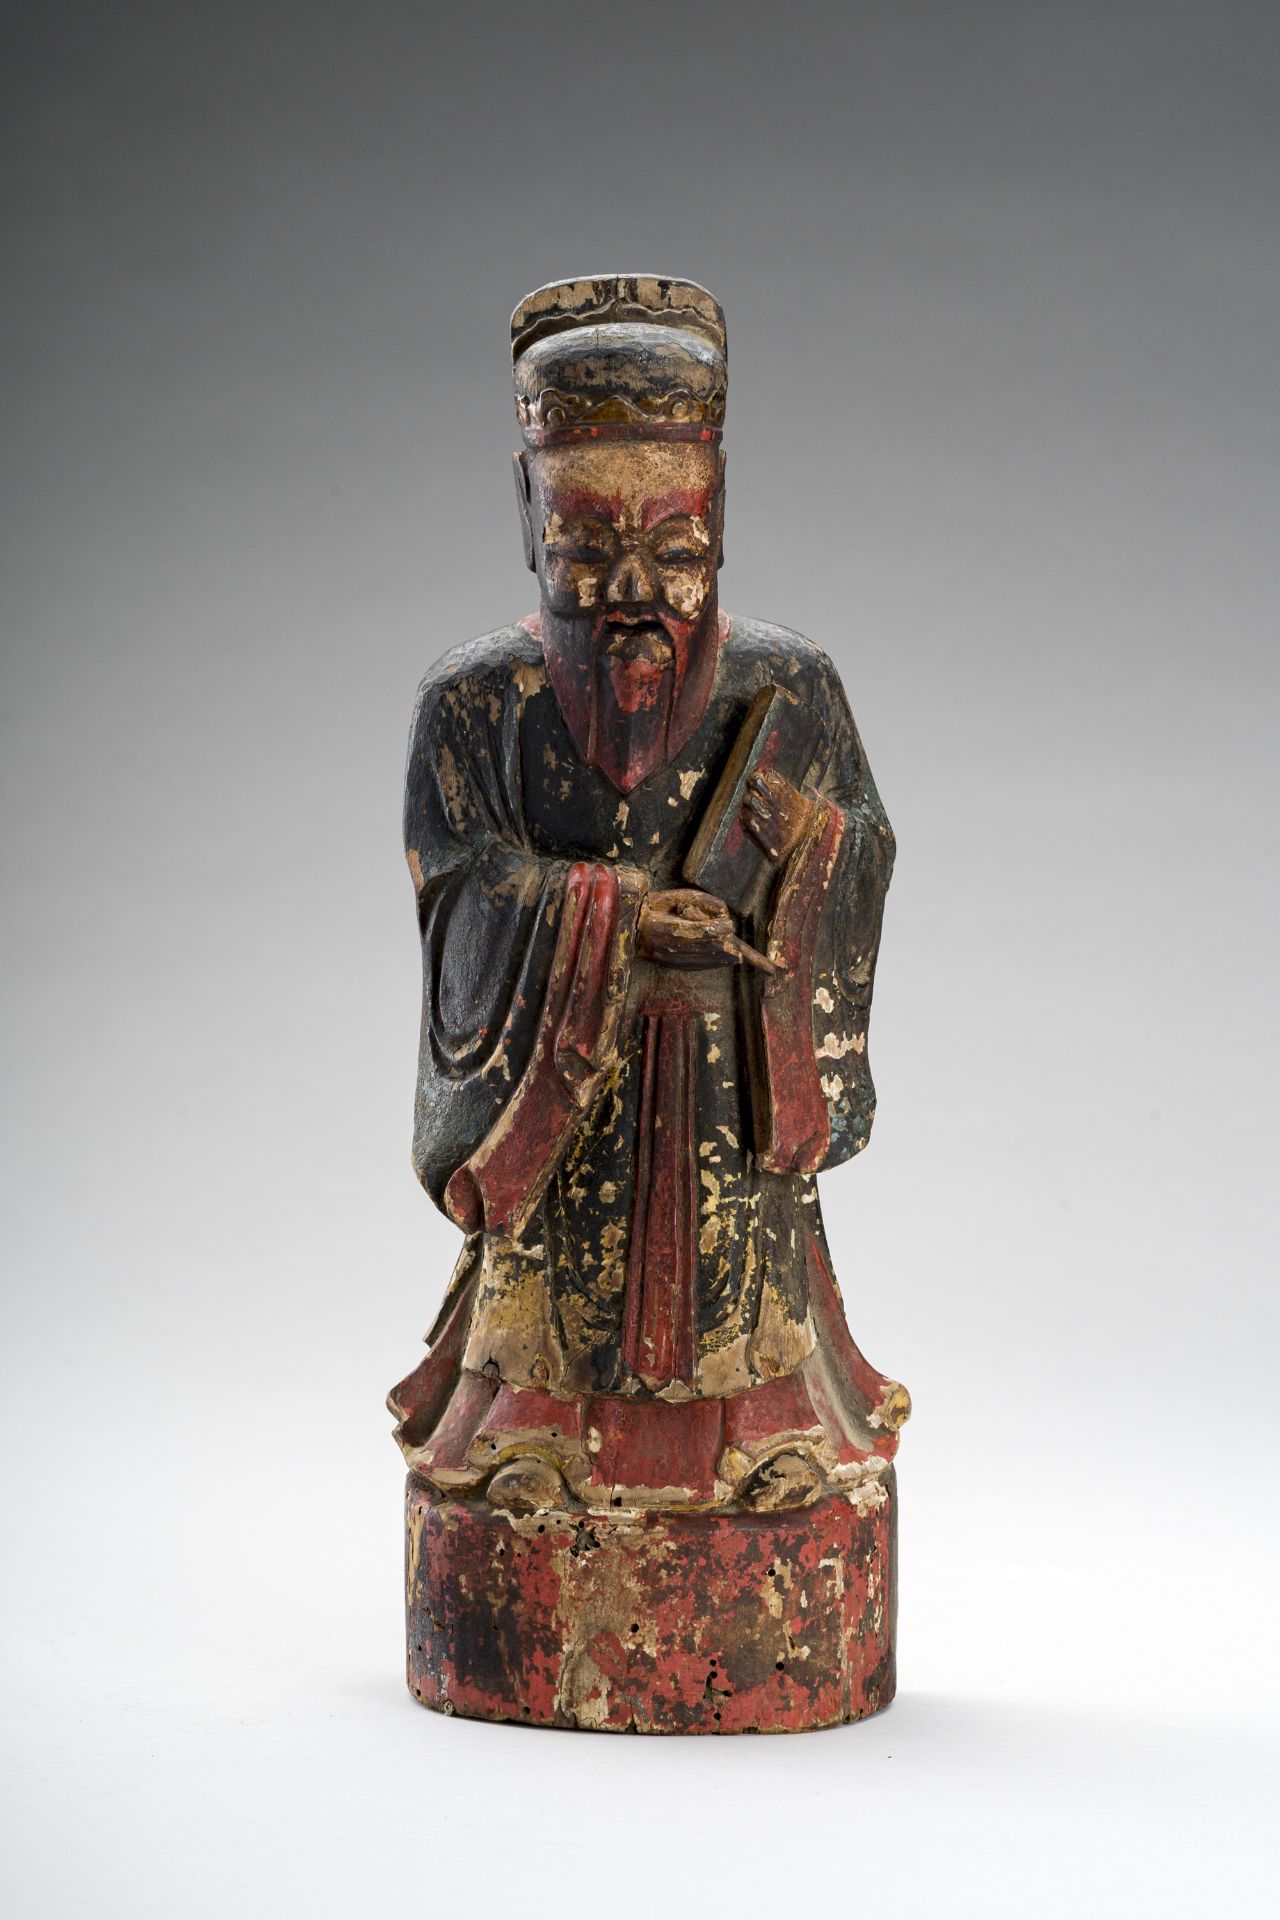 A LACQUERED WOOD FIGURE OF A DIGNITARY, EARLY QING